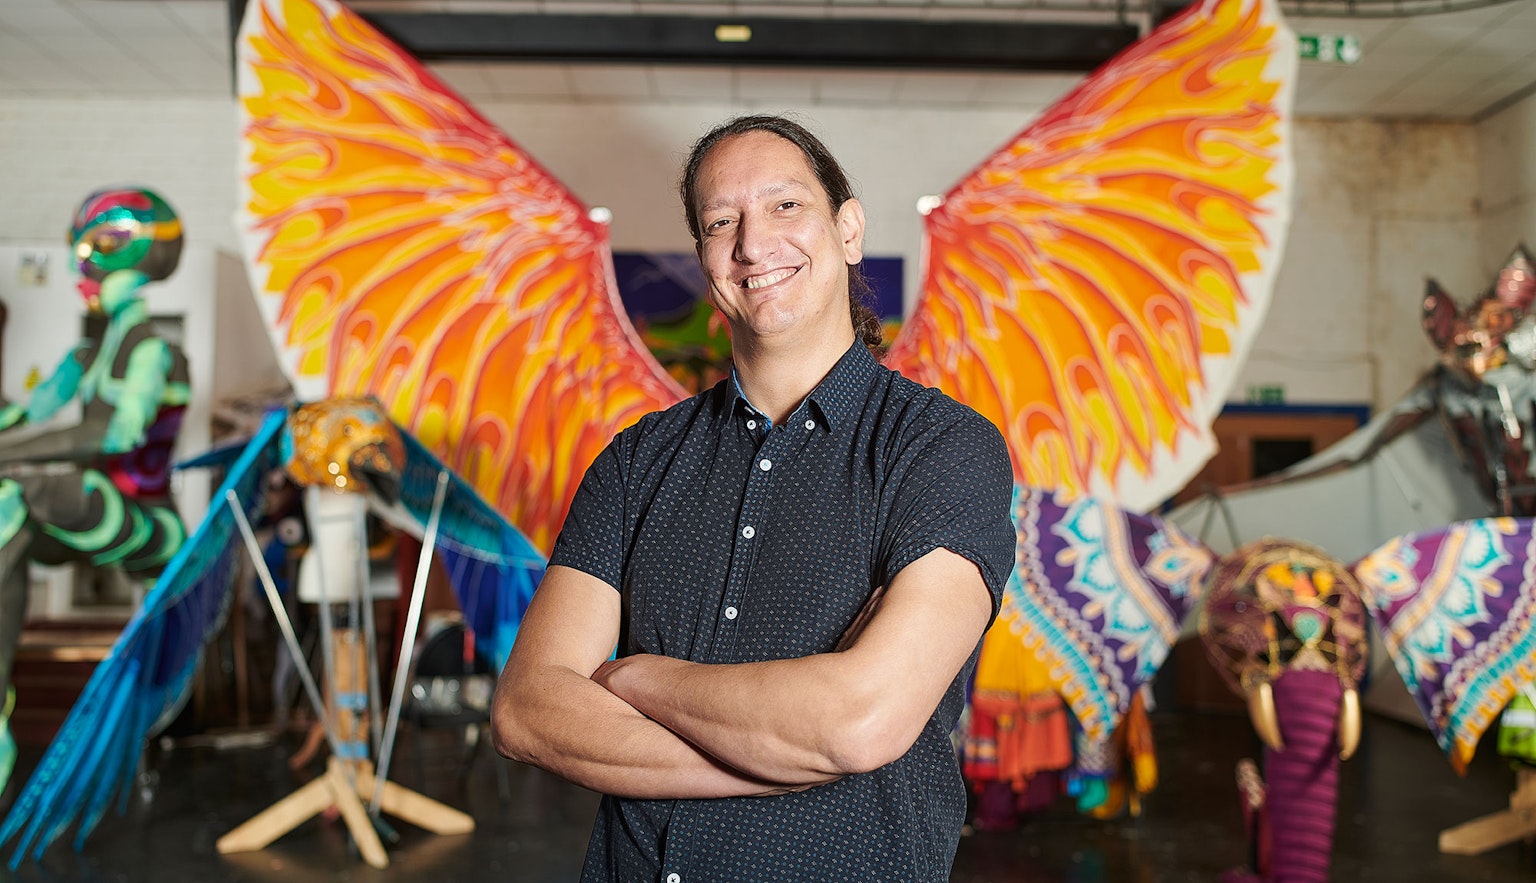 Leon Patel with his arms folded looking into the camera and smiling. Behind him are various multicoloured parade puppets in the shape of different animals.